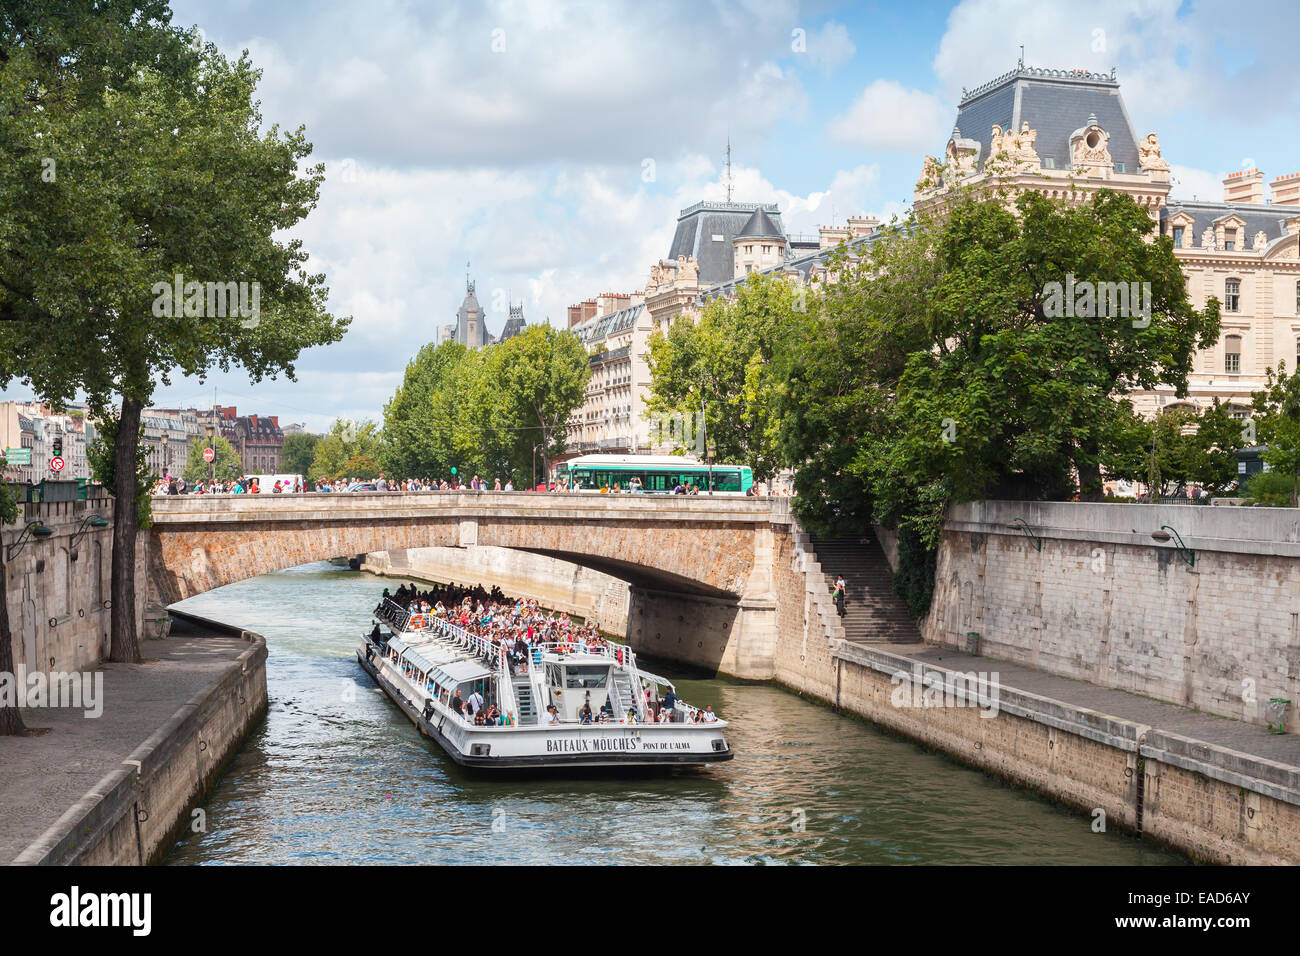 Paris, France - August 11, 2014: White passenger touristic ship operated by Bateaux-Mouches goes under the Bridge on Seine river Stock Photo